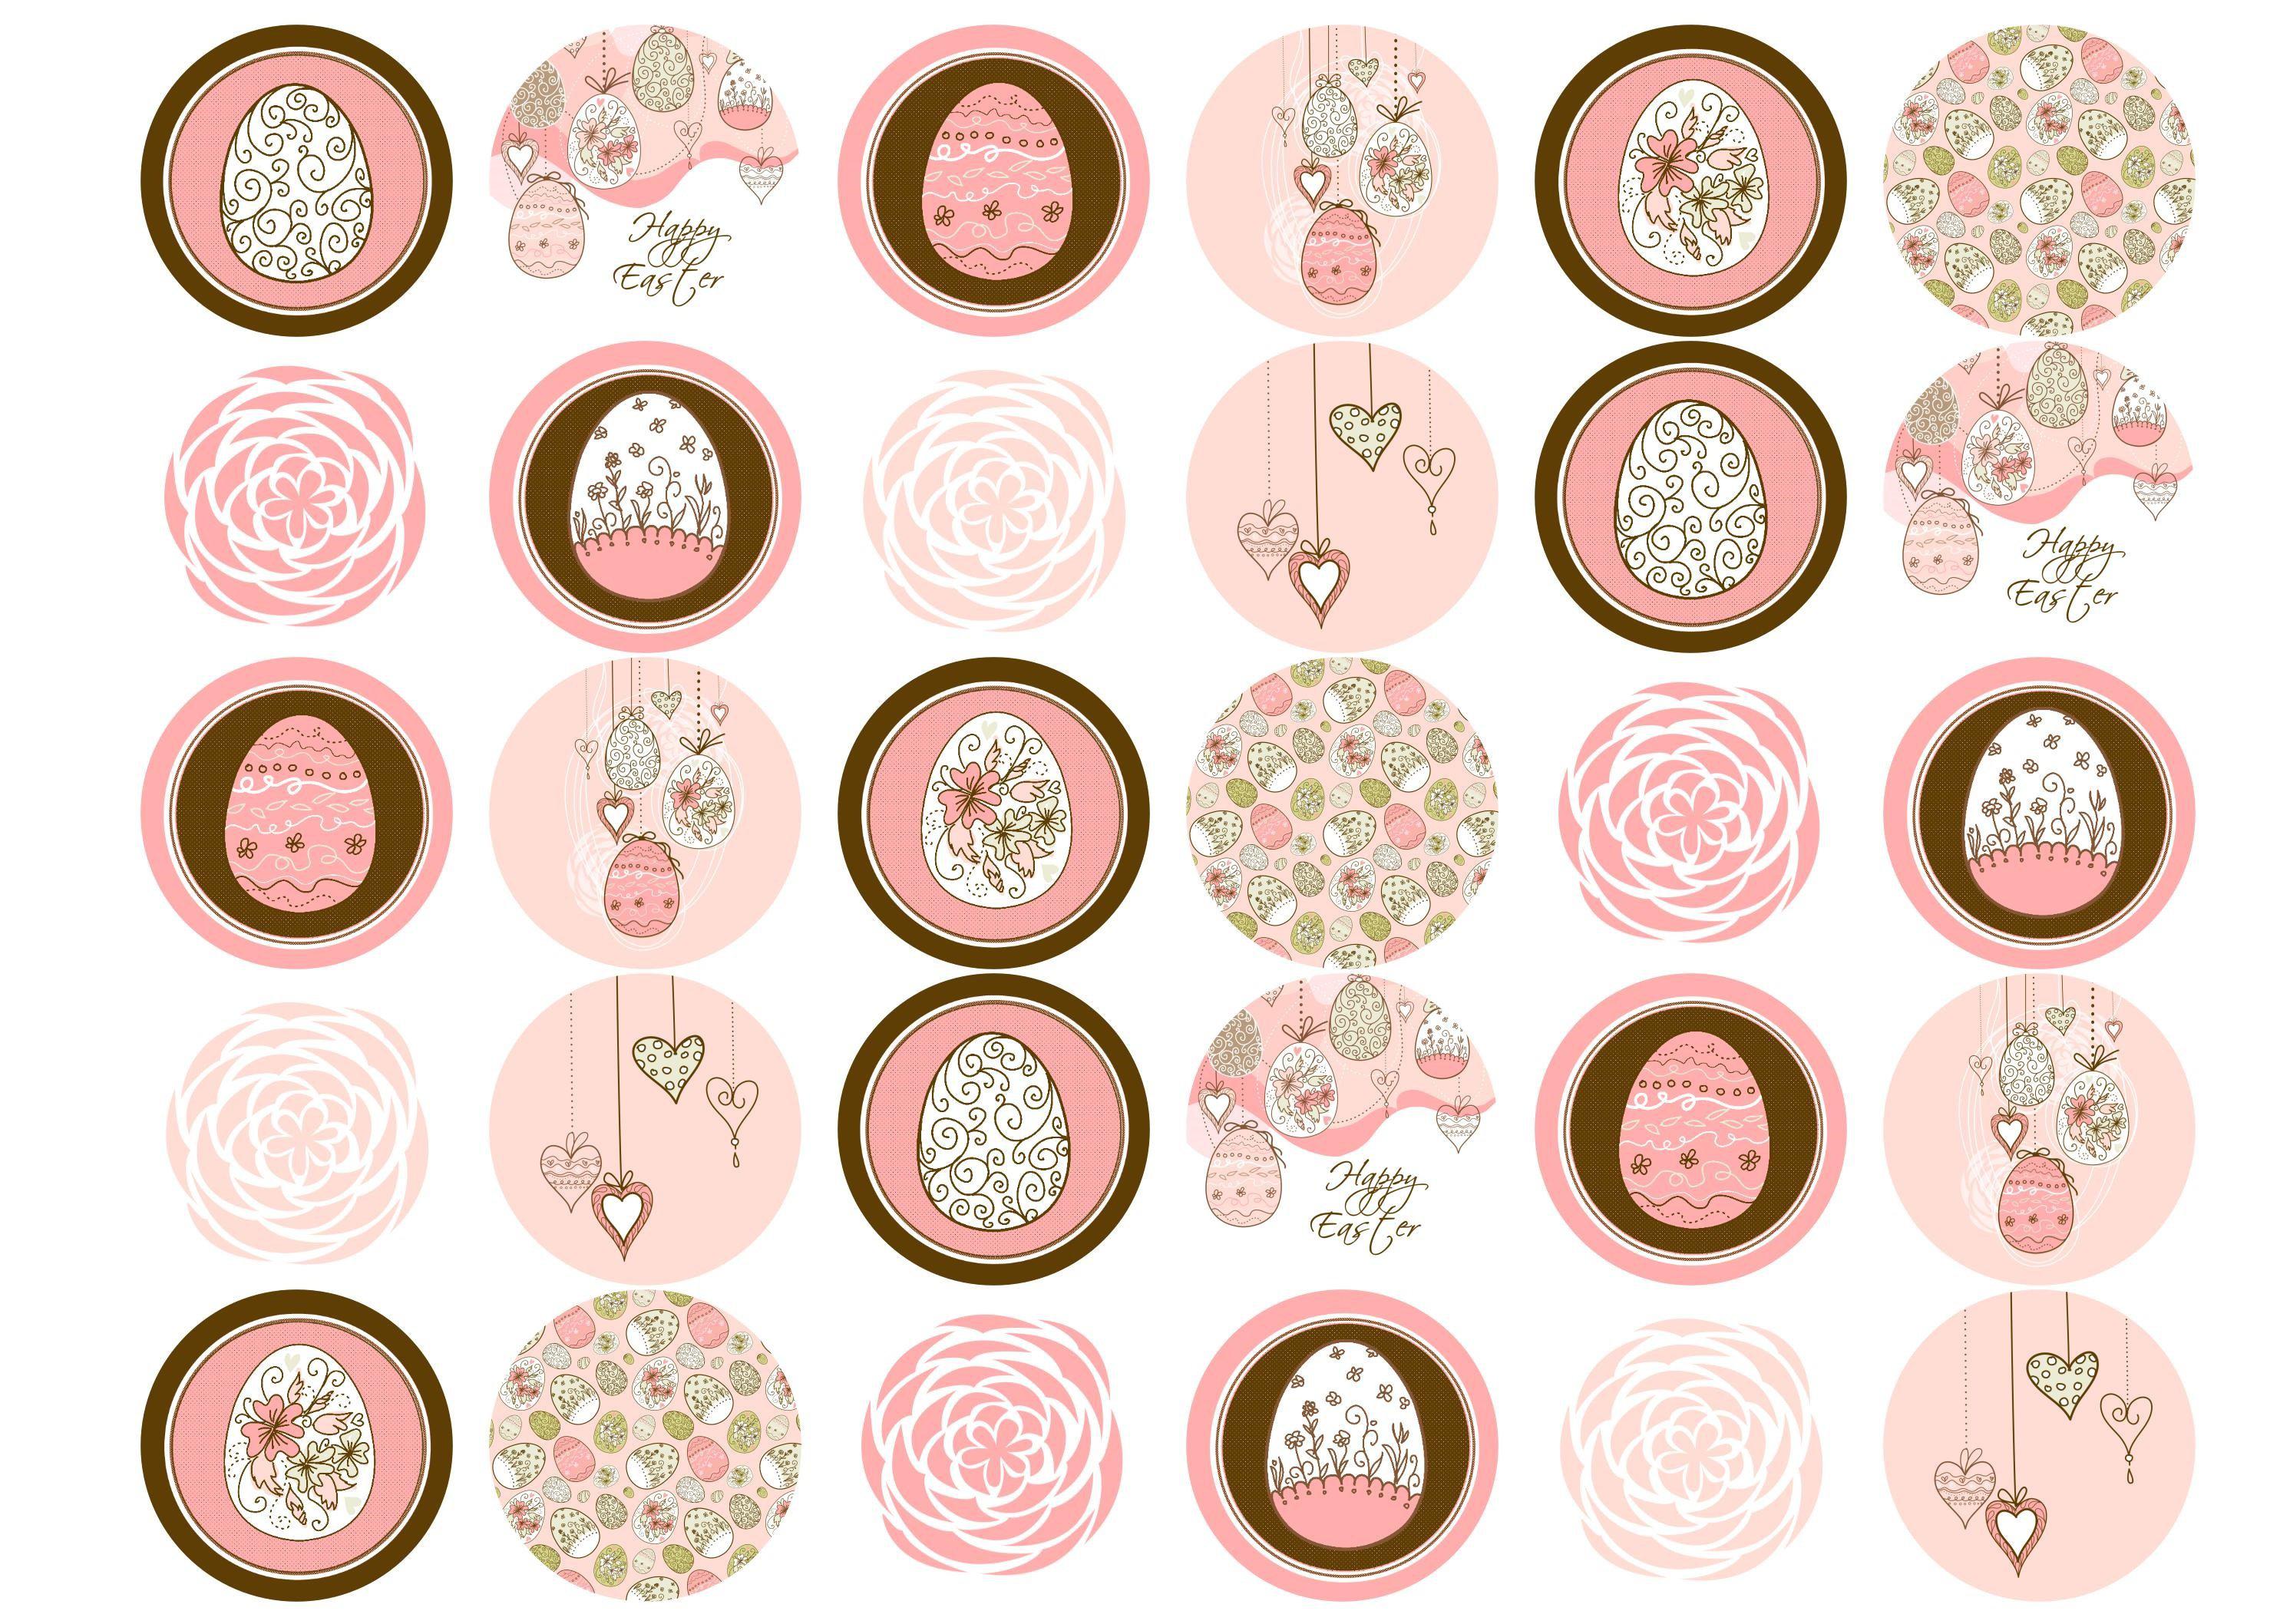 Edible cupcake toppers with pink and brown Easter Egg images